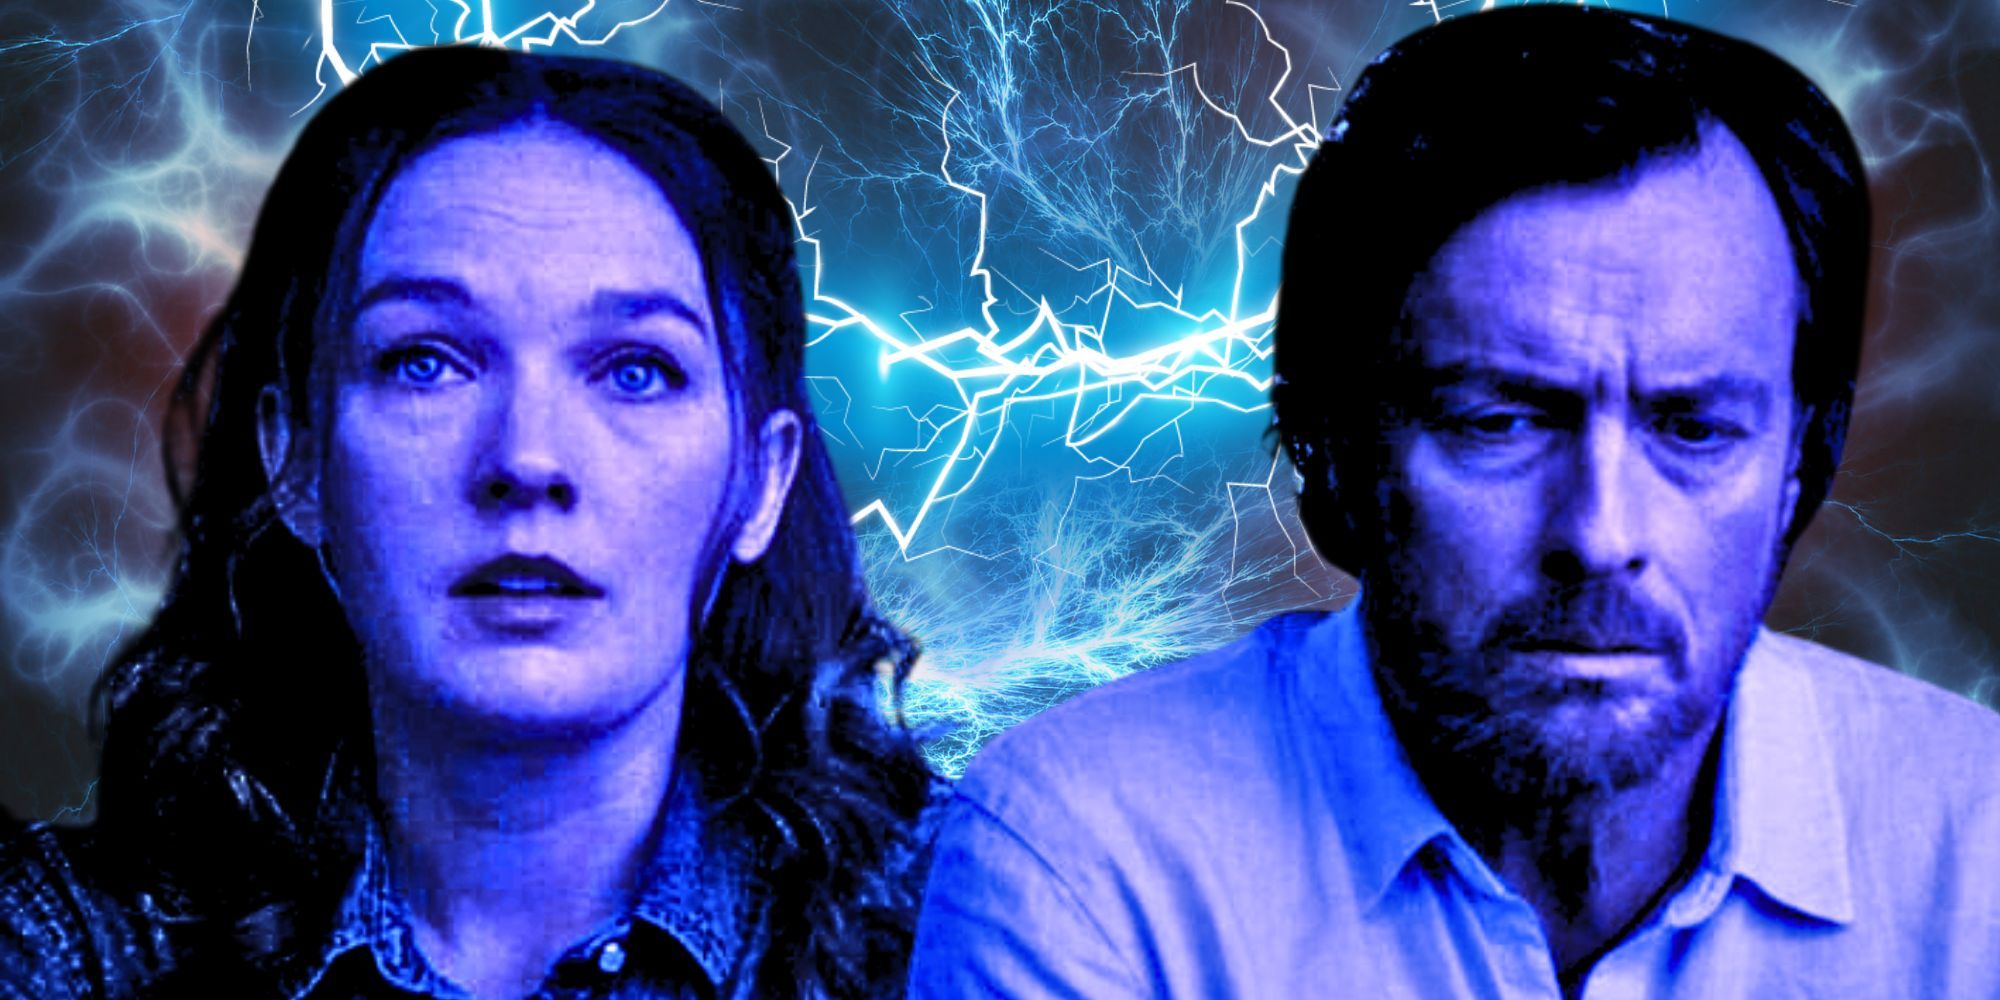 Sally Jackson and Poseidon from Percy Jackson looking upset with lightning behind them